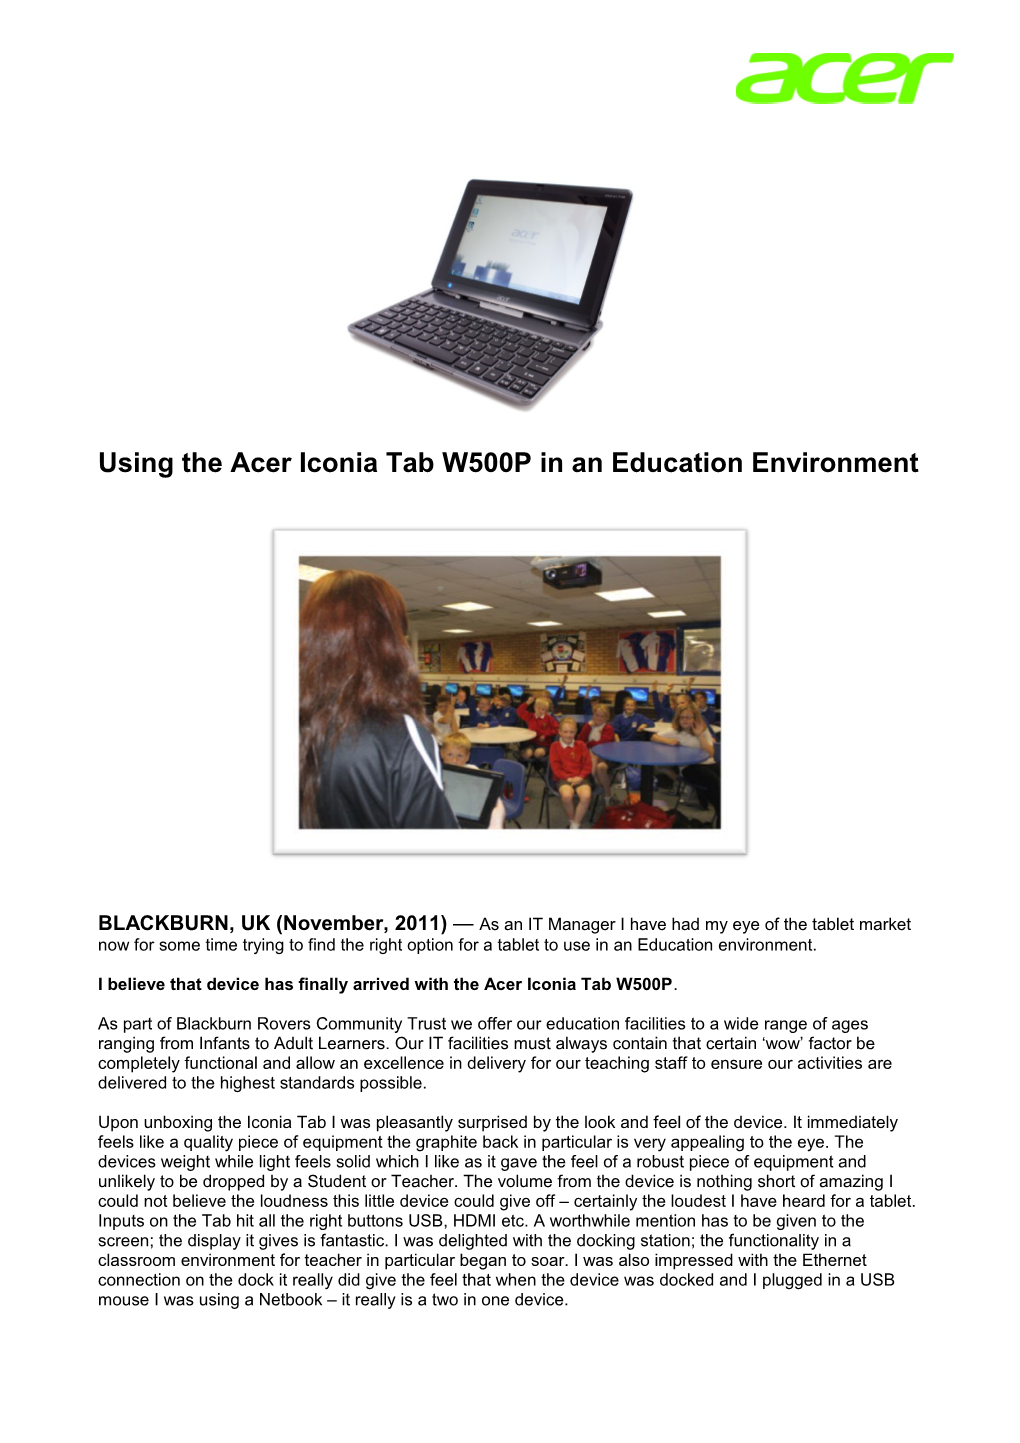 Using the Acer Iconia Tab W500P in an Education Environment